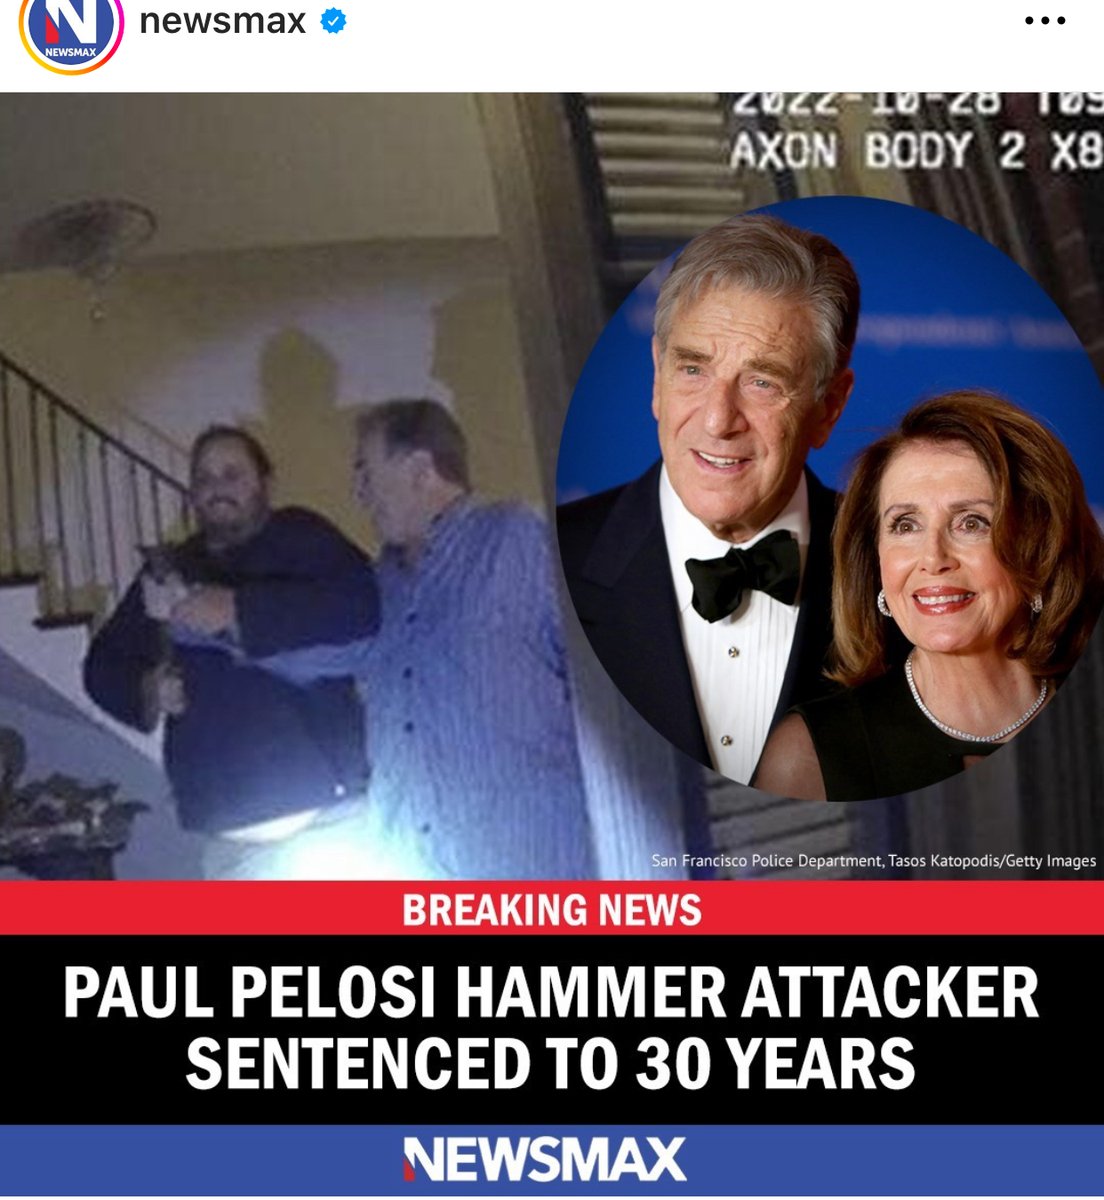 That was a F A S T & speedy trial, wouldn't you say? And the sentence was MORE than the crime, actually. Murderers, of late, have shorter sentences. Just that the 'victim' was a Pelosi. That's all it was.